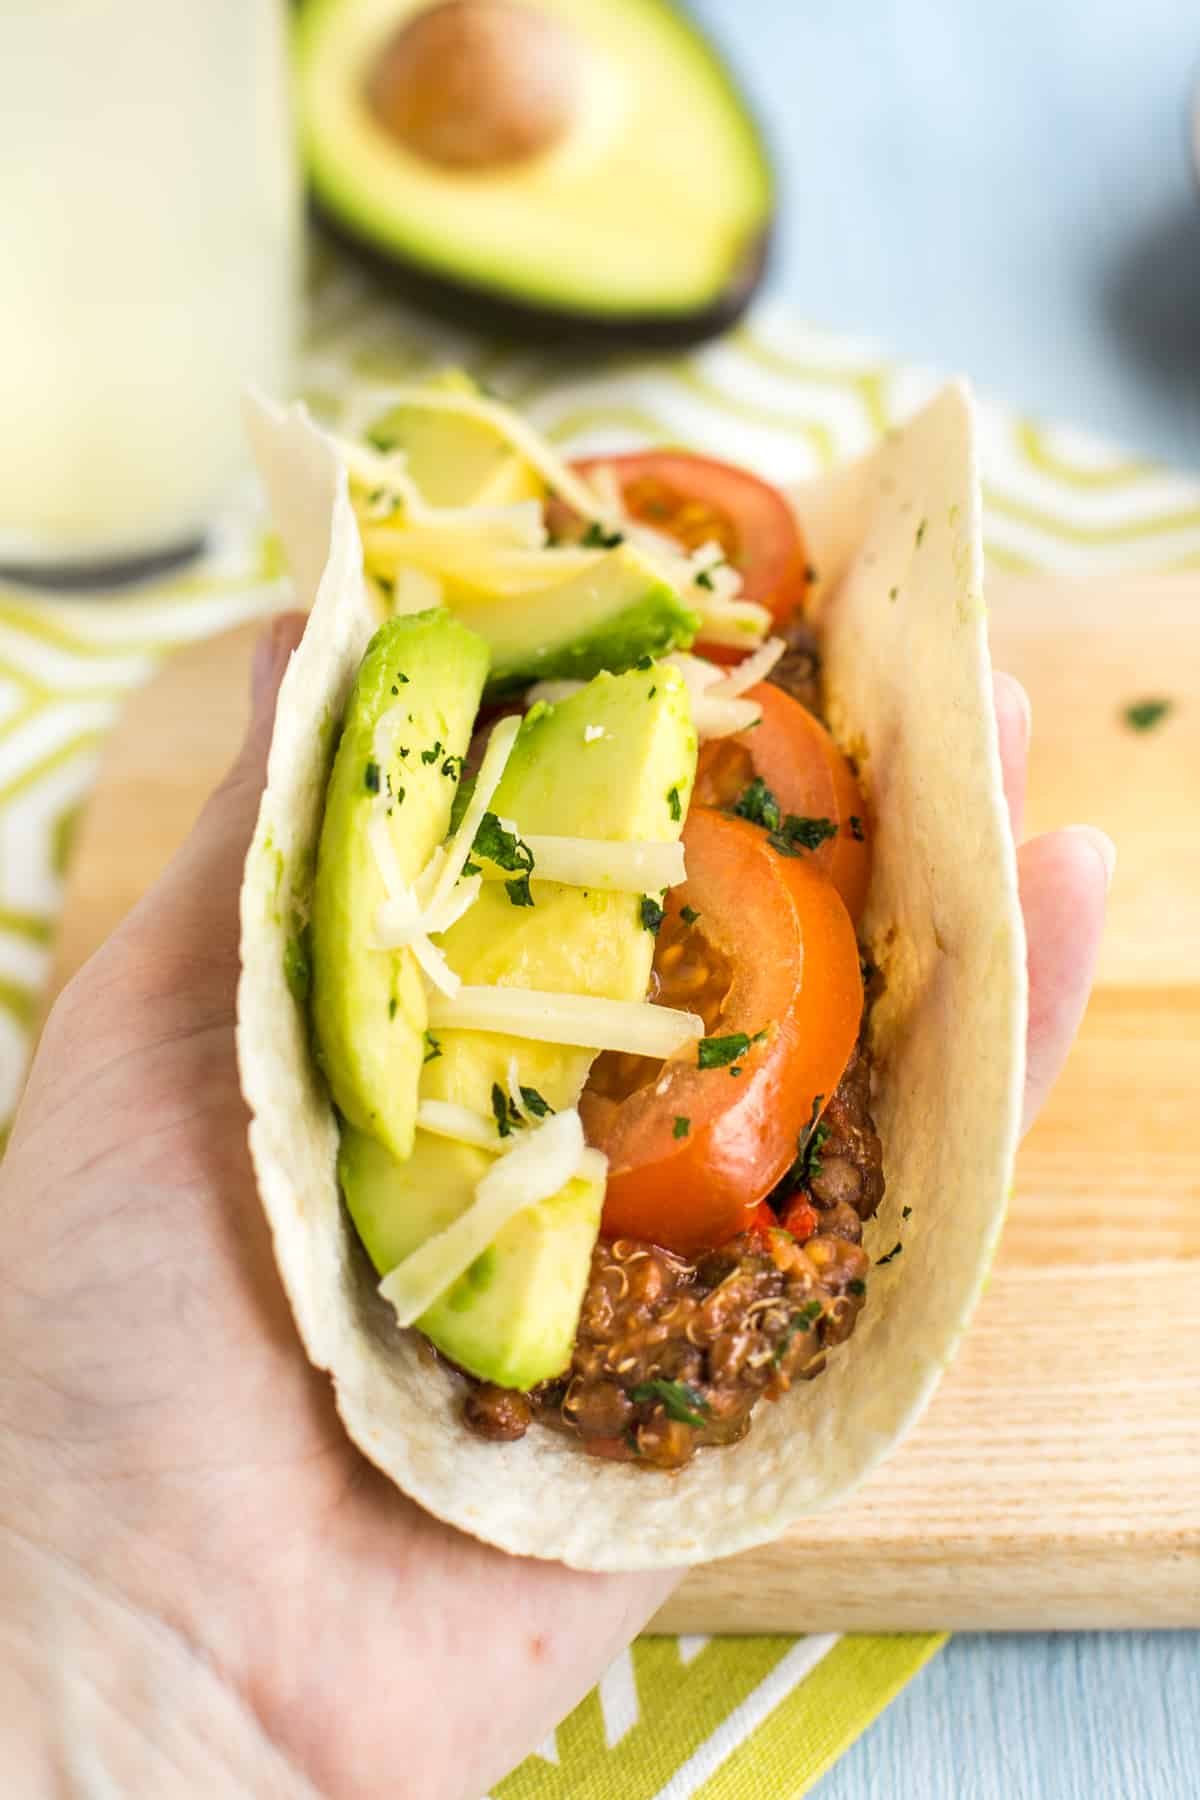 A lentil and quinoa taco topped with tomato and avocado, being held up in a hand.